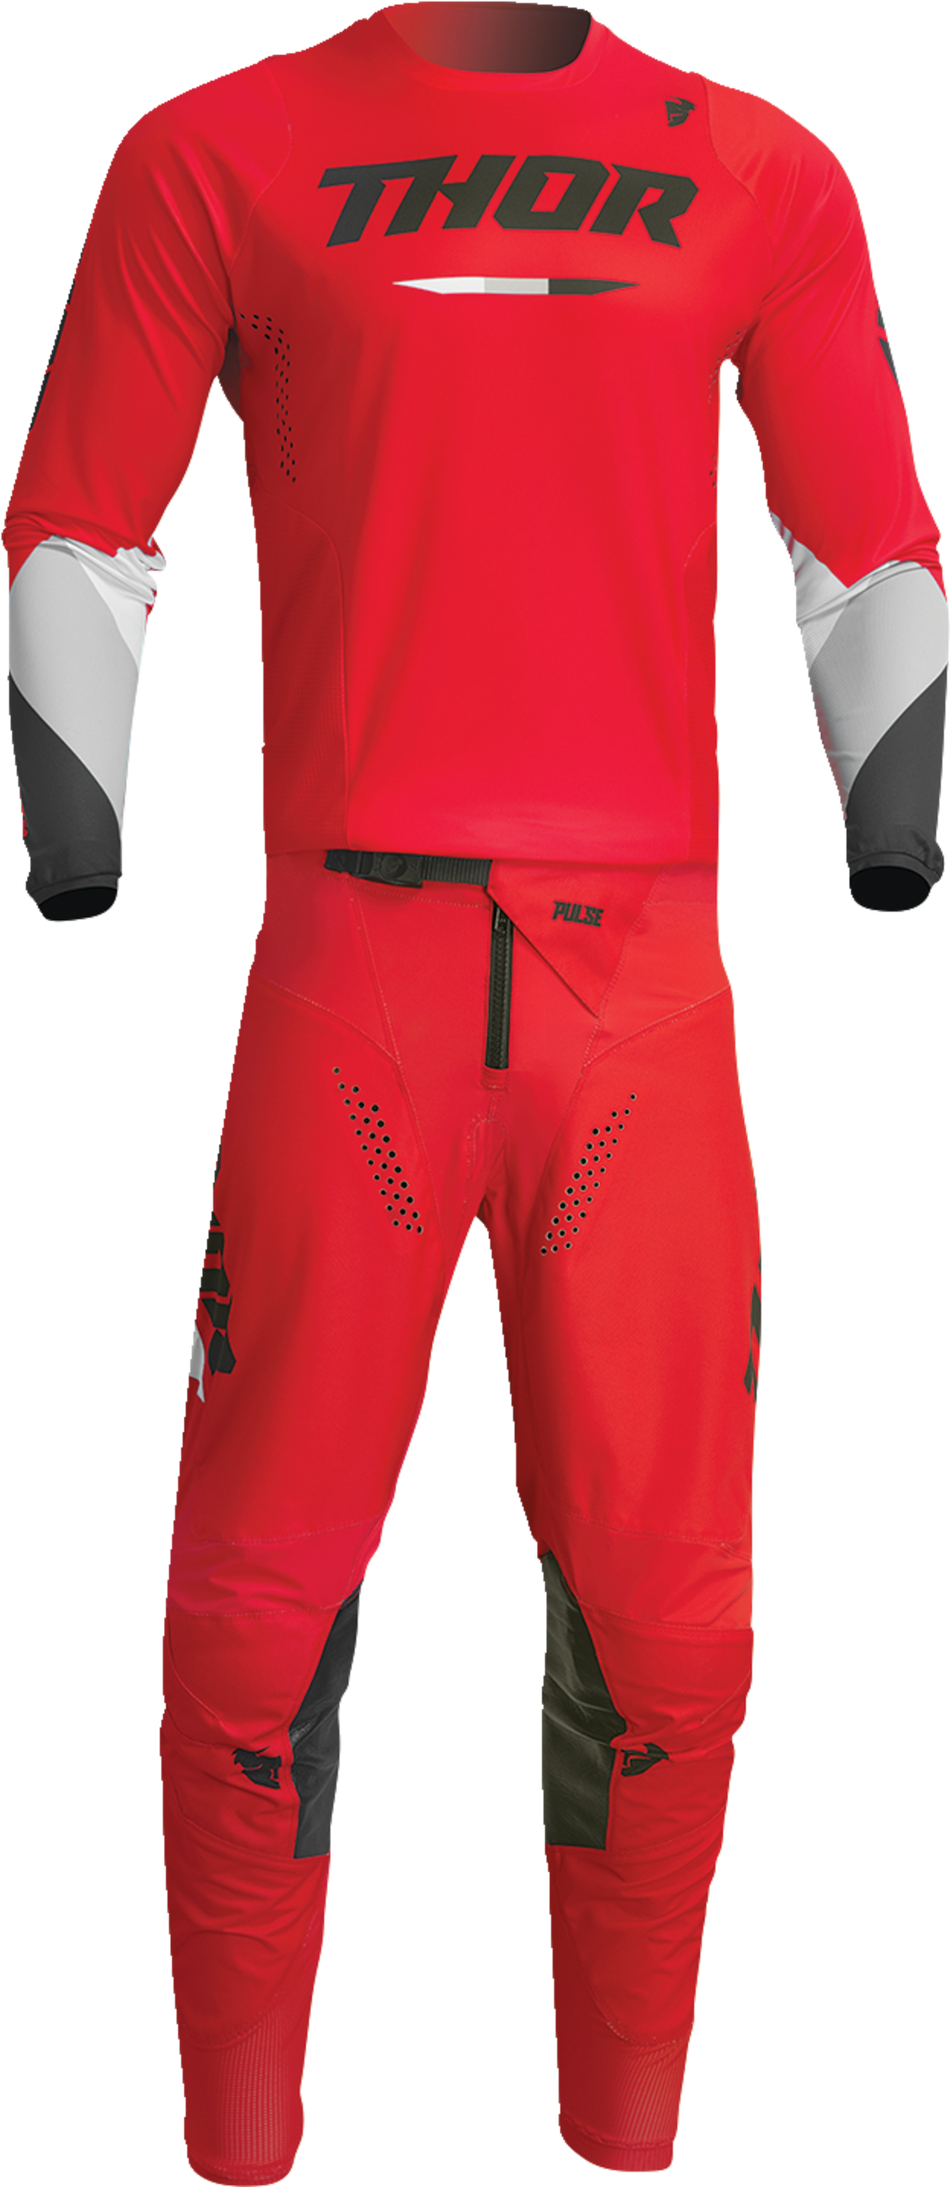 THOR Pulse Tactic Jersey - Red - Large 2910-7081